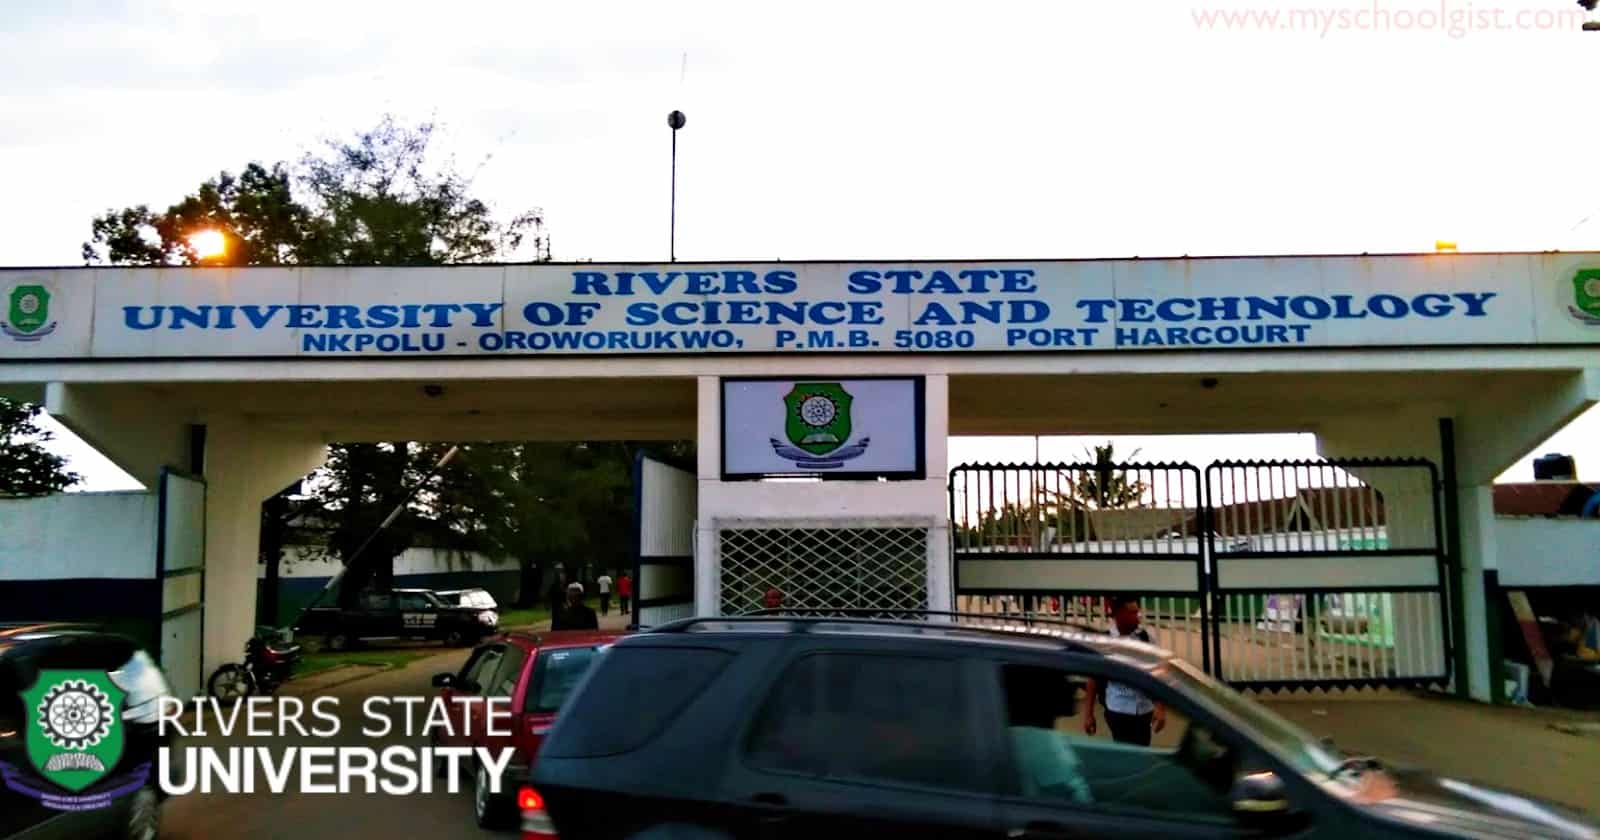 Rivers State University (RSU) Supplementary Admission Form